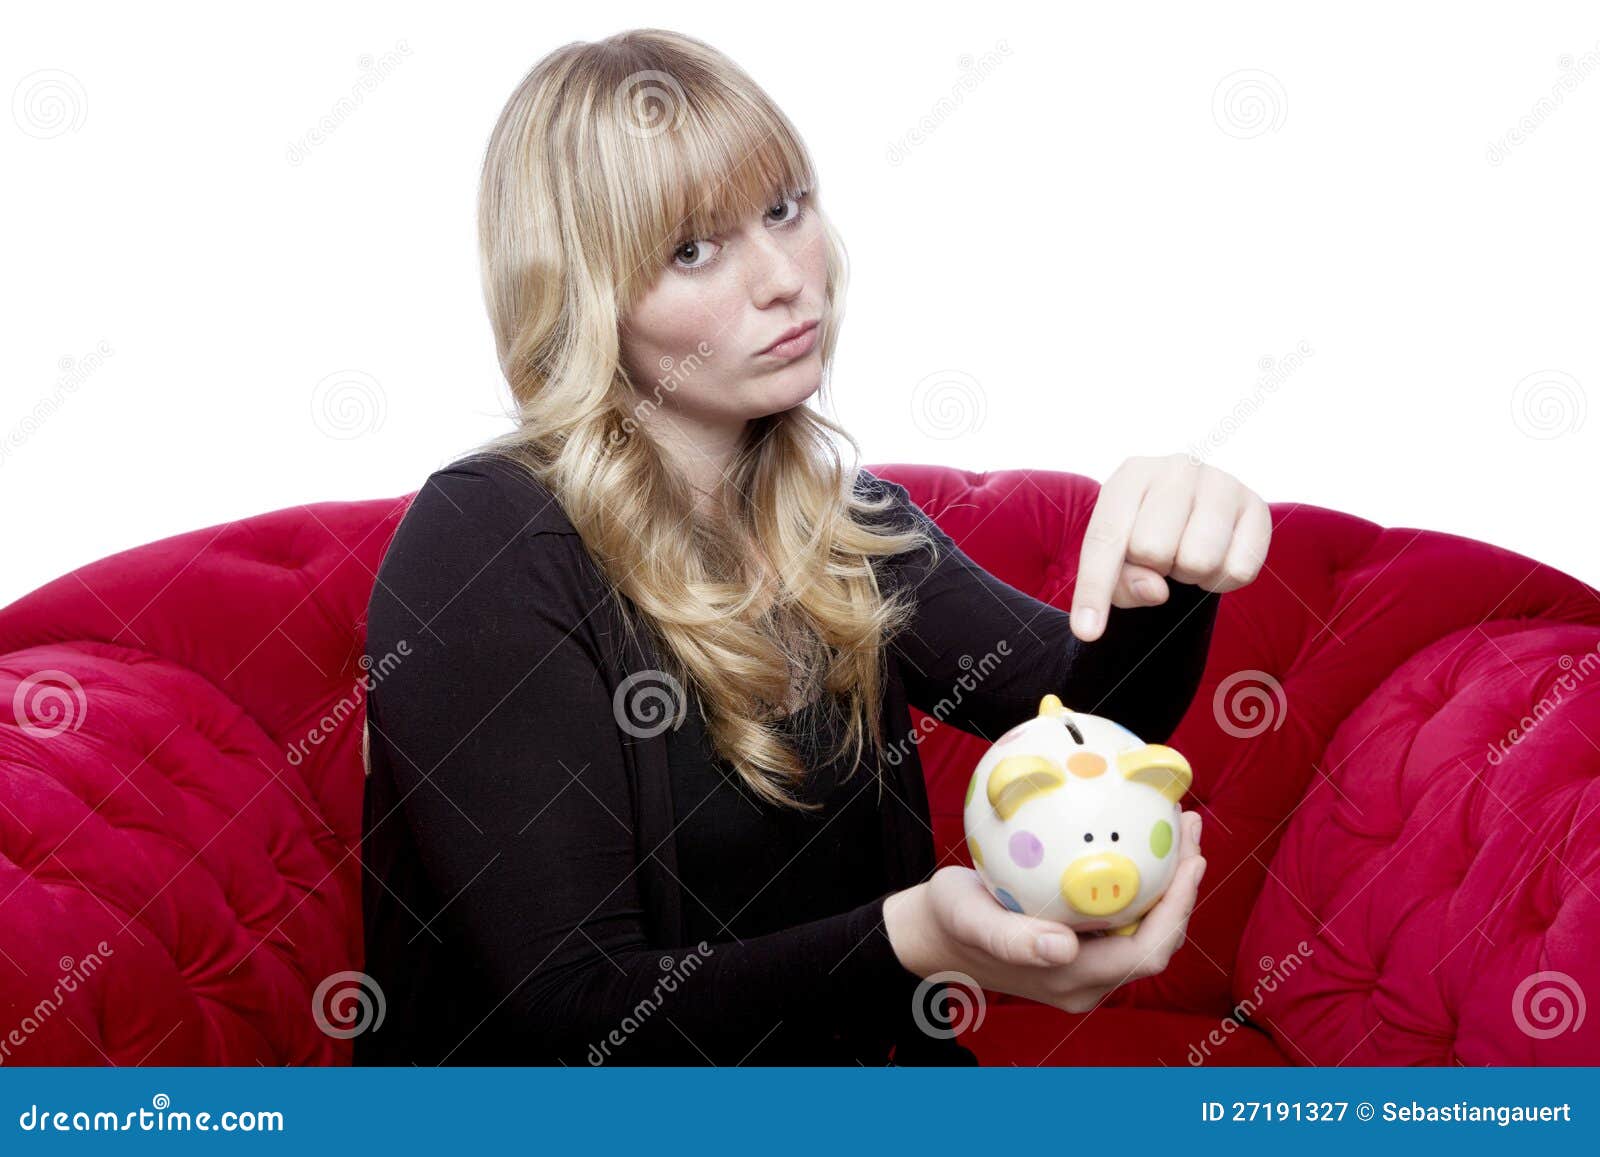 Young girl want money in her piggybank. Young blond haired girl want money in her piggybank on red sofa in front of white background